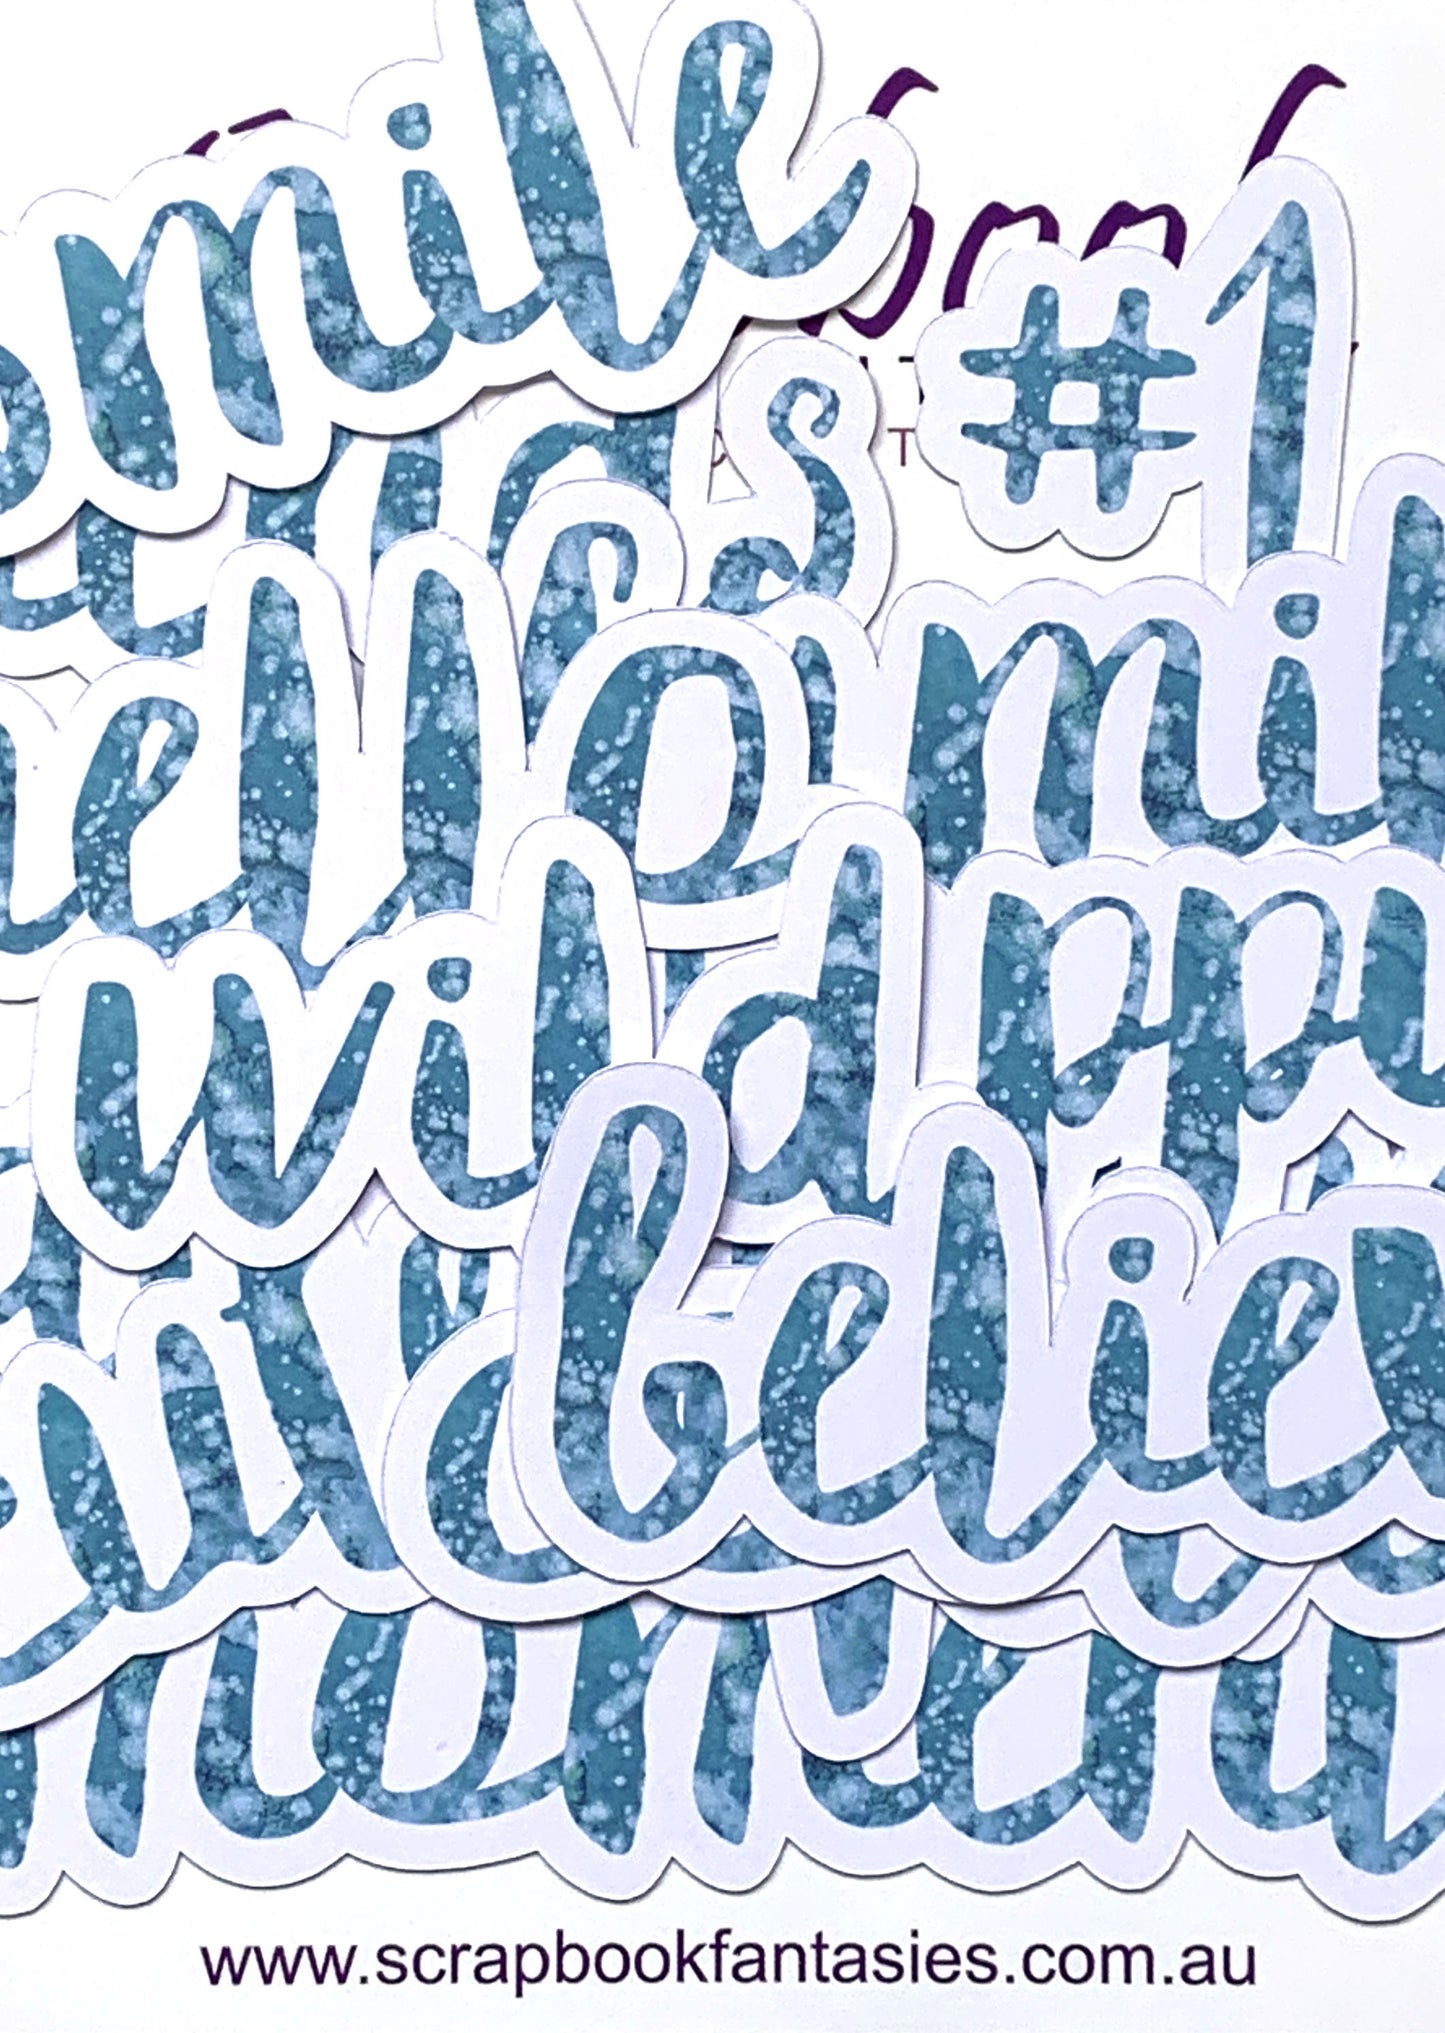 Colour-Cuts Words 1 - Teal Salted Watercolour (13 pieces) Designed by Alicia Redshaw